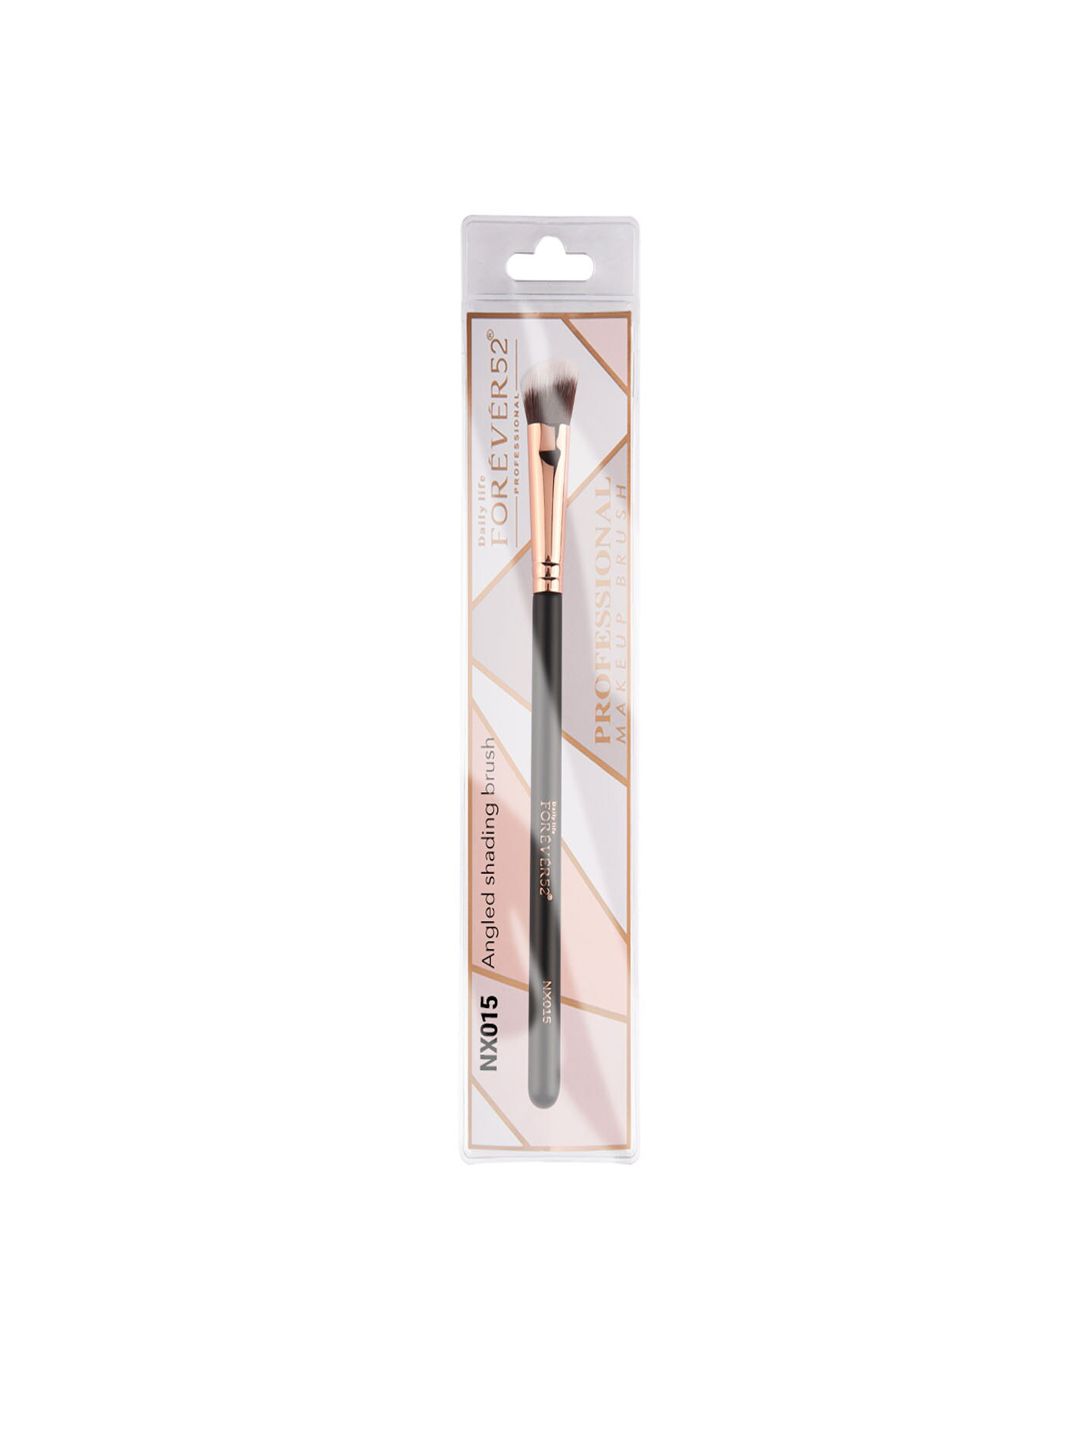 Daily Life Forever52 Angled shading brush NX015 Price in India